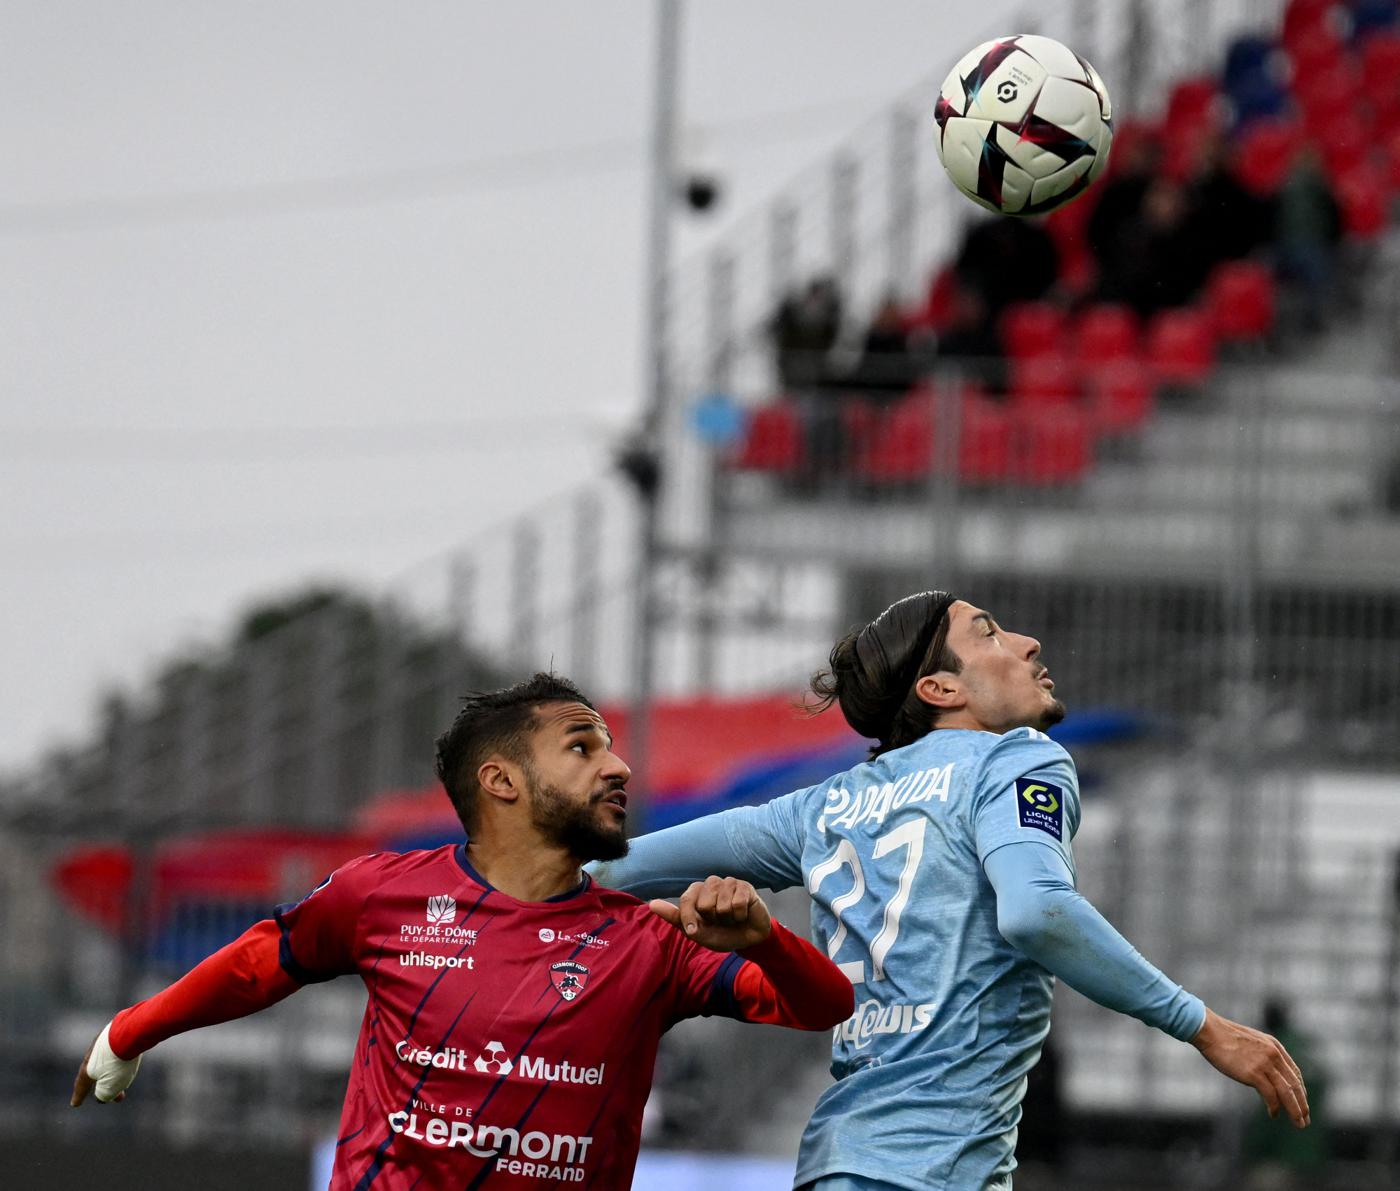 Clermont - Ajaccio - 2:1. French Championship, 29th round. Match review, statistics